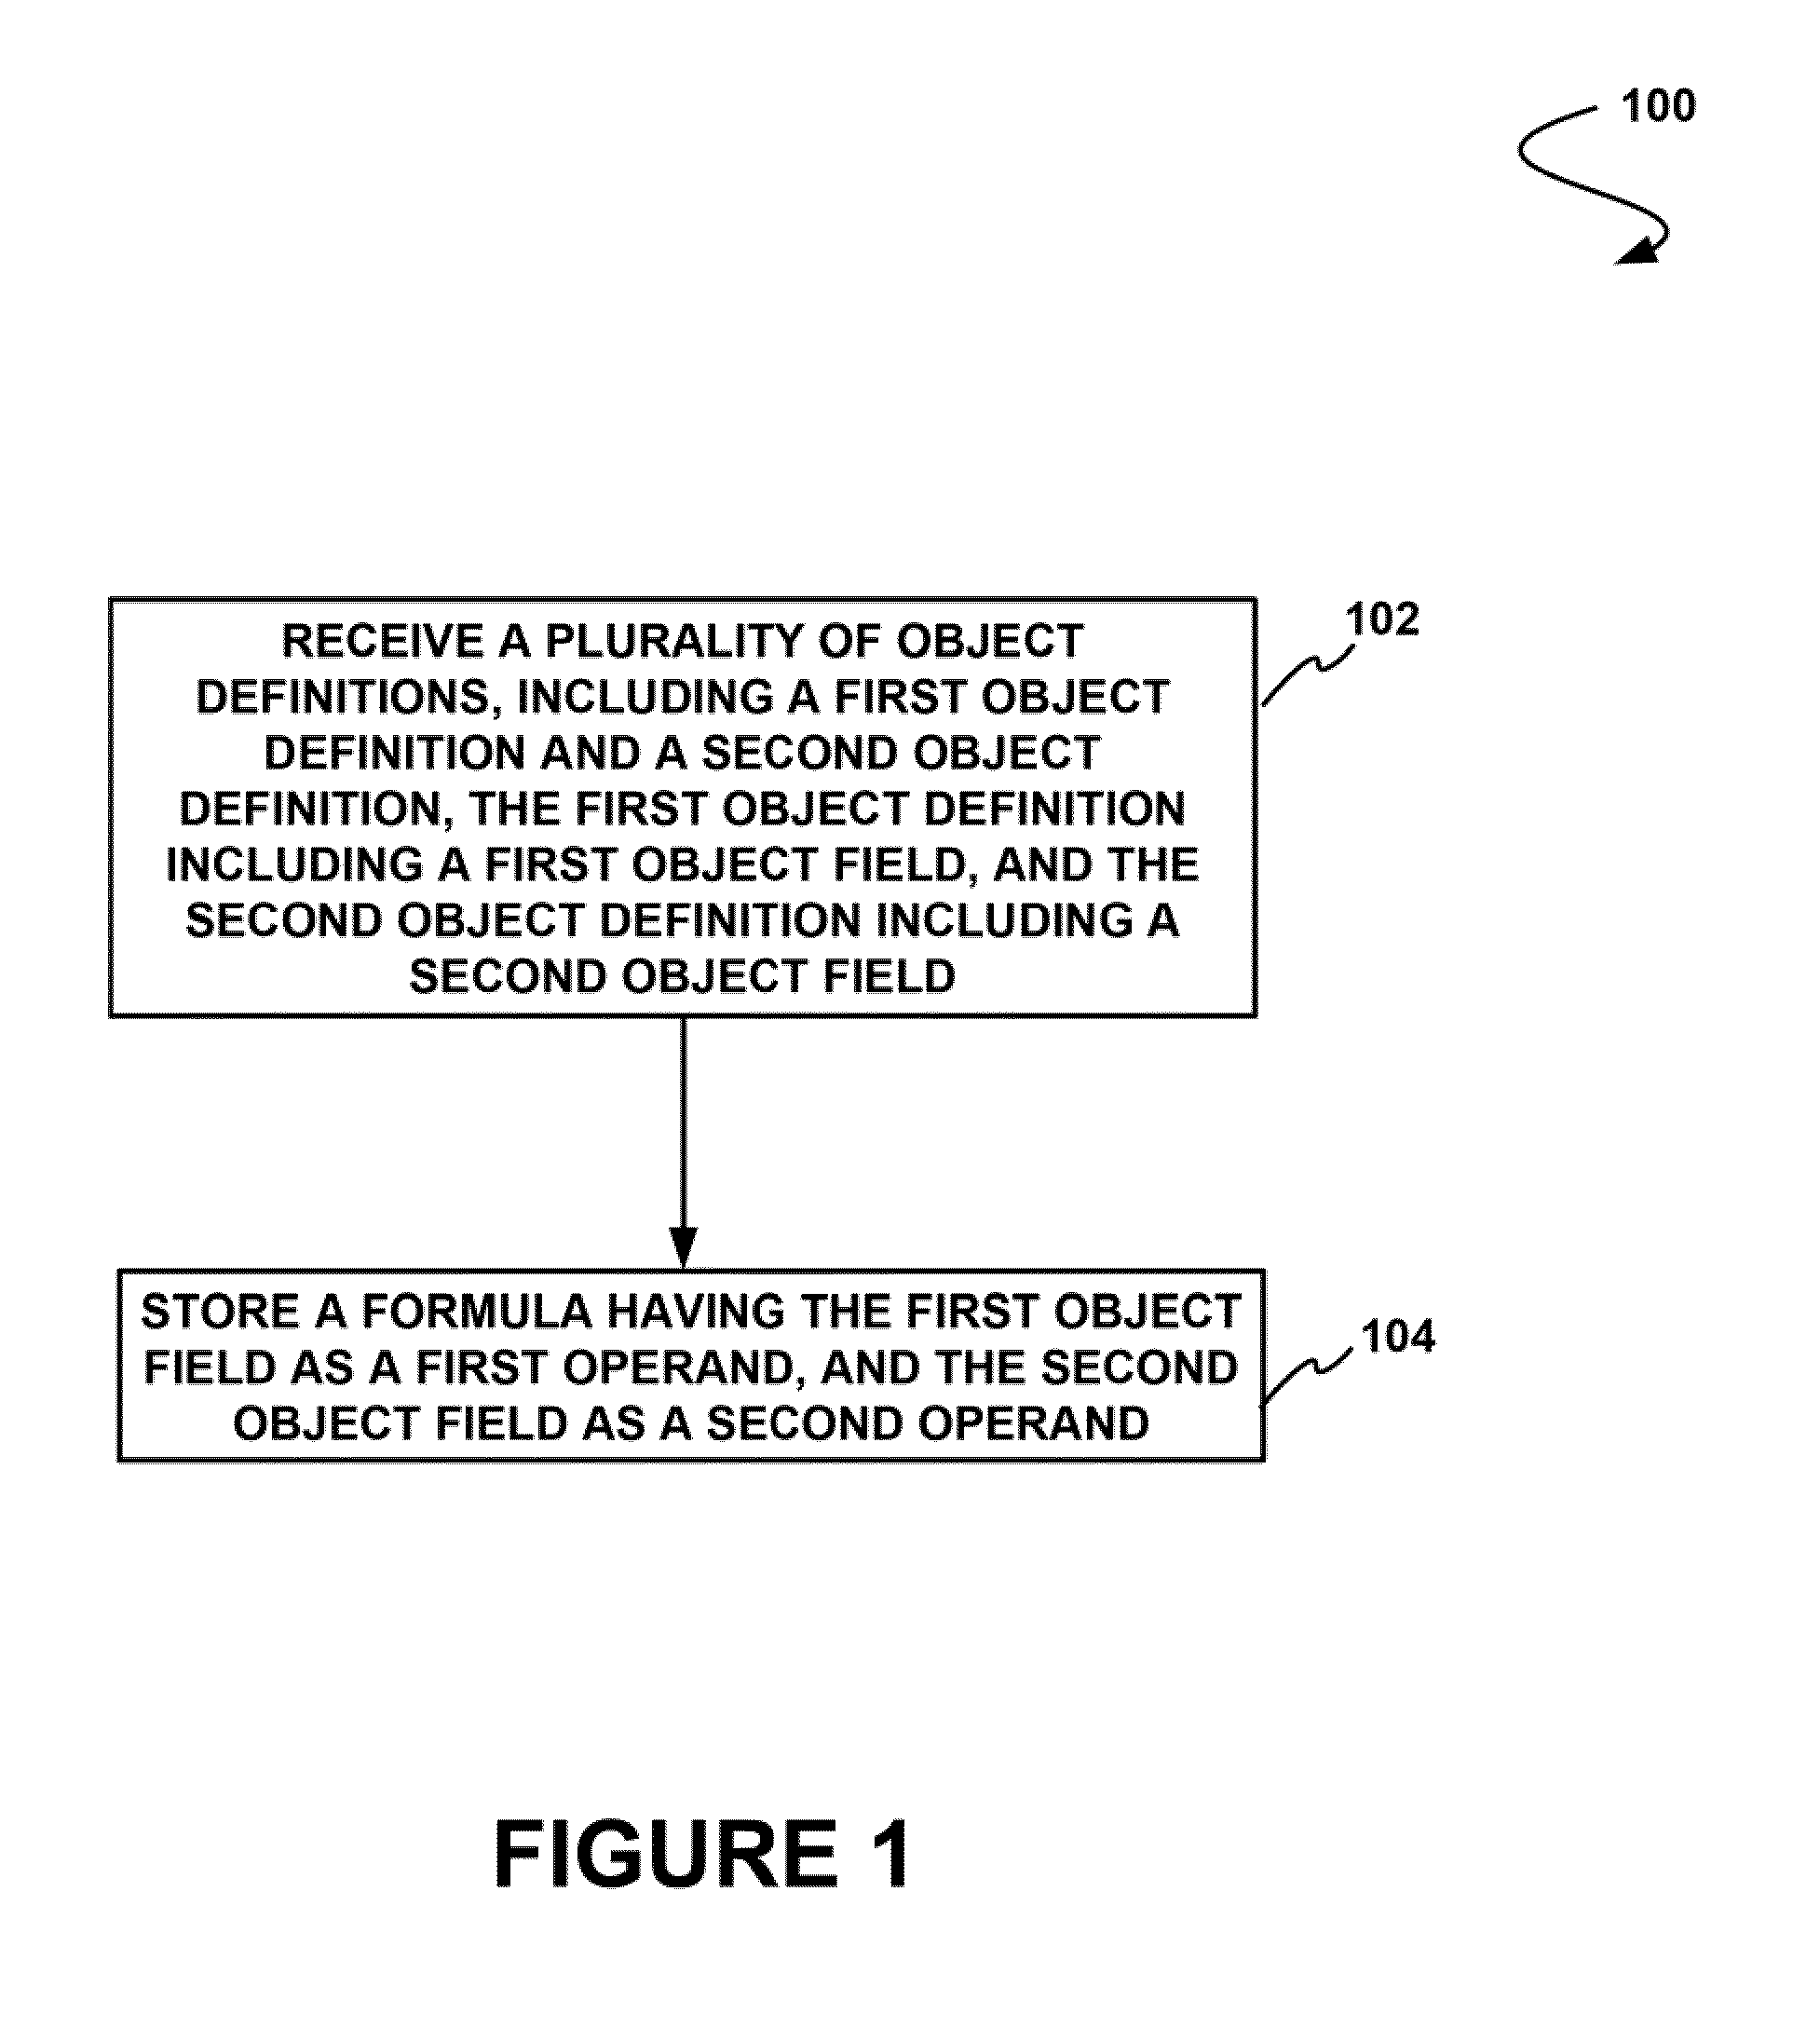 System, method and computer program product for storing a formula having first and second object fields